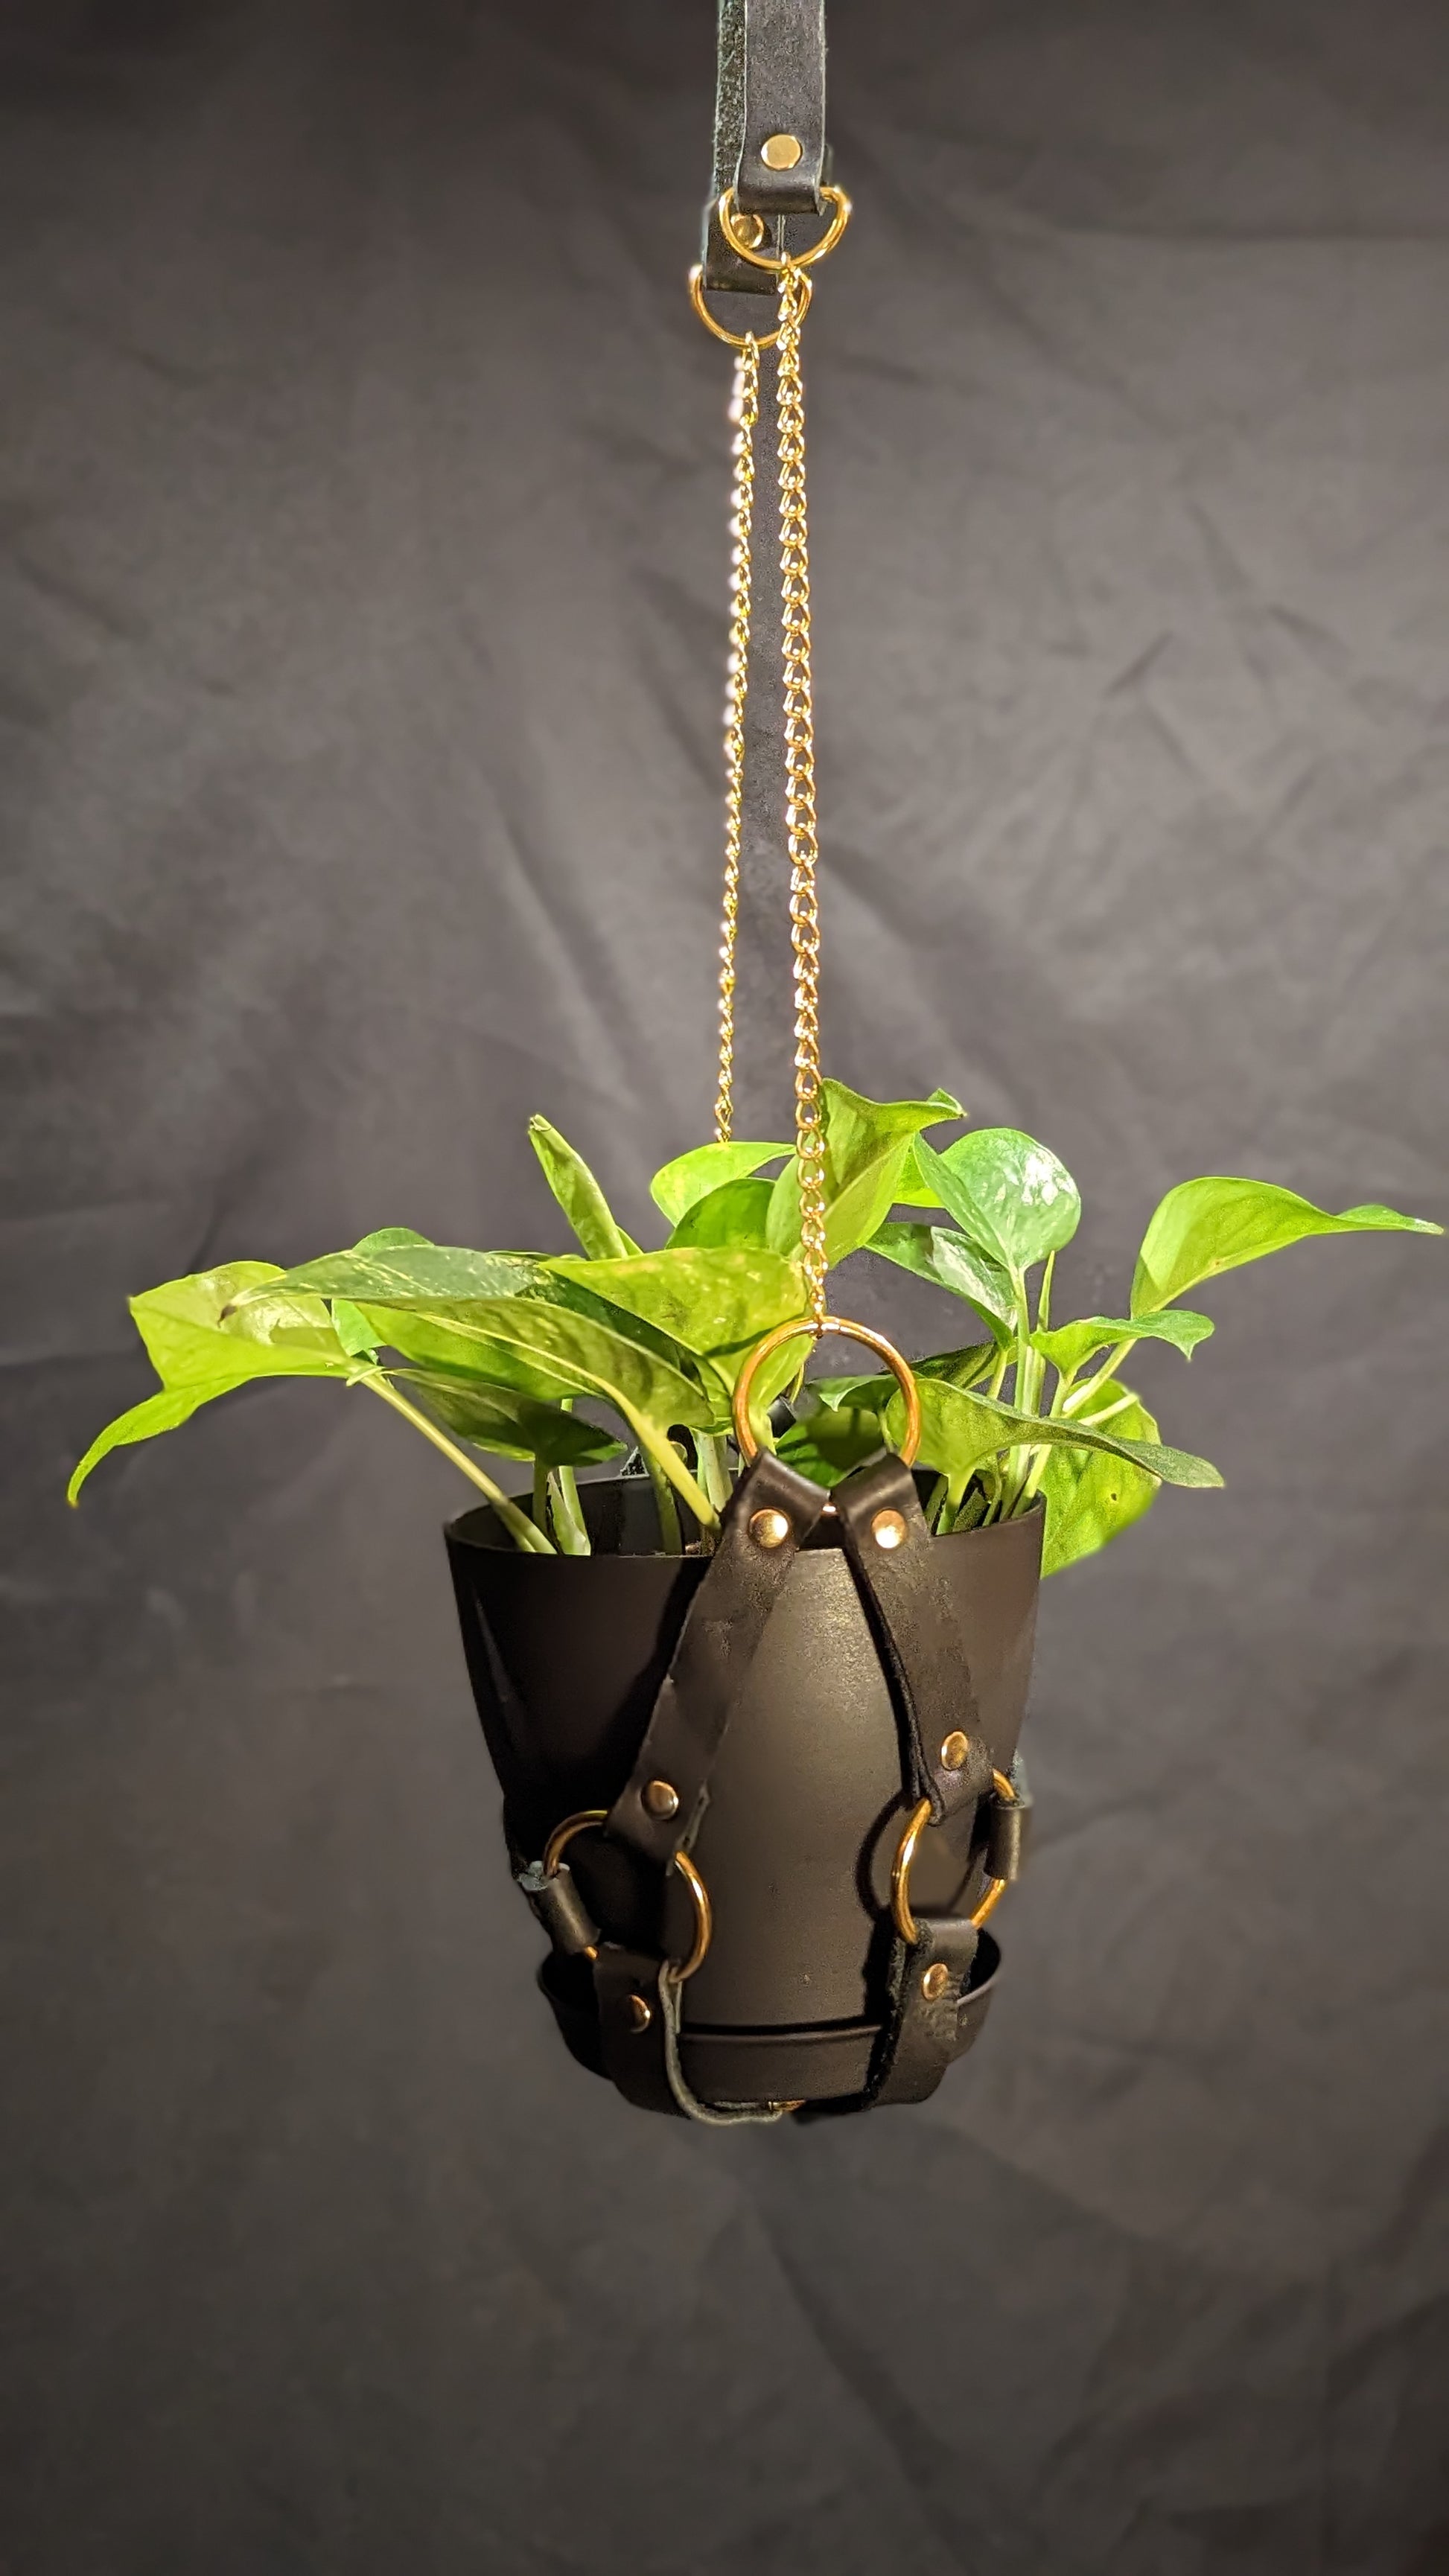 Black leather plant hanger with gold hardware and chain. It is holding a 6" black plant pot with a golden pothos plant.